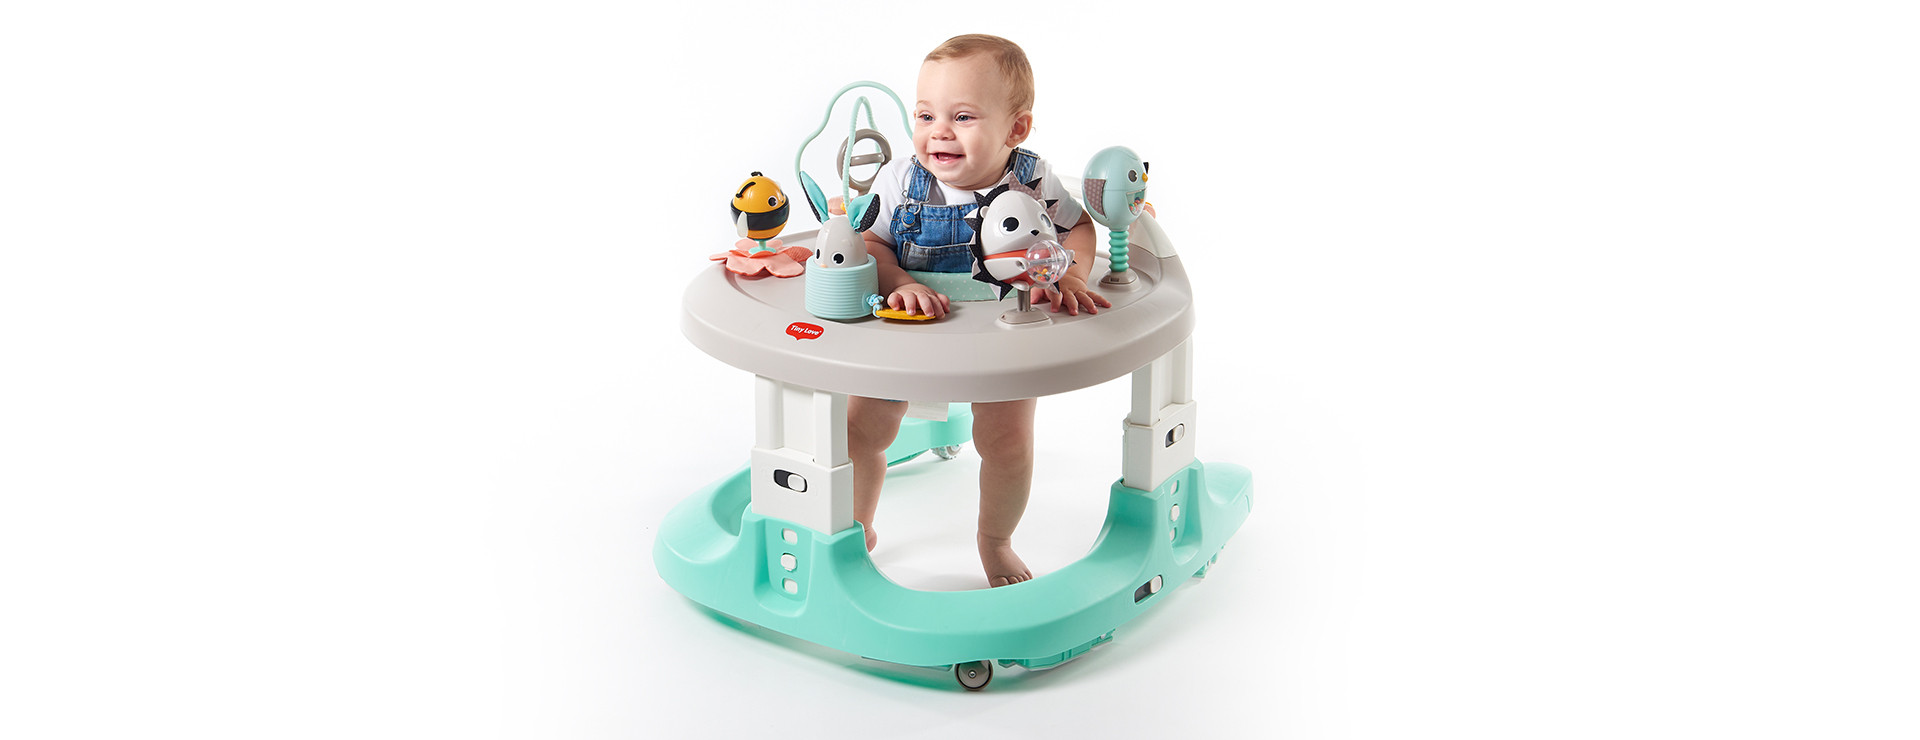 360 degree seat spin promotes self-motivated exploration of baby’s world